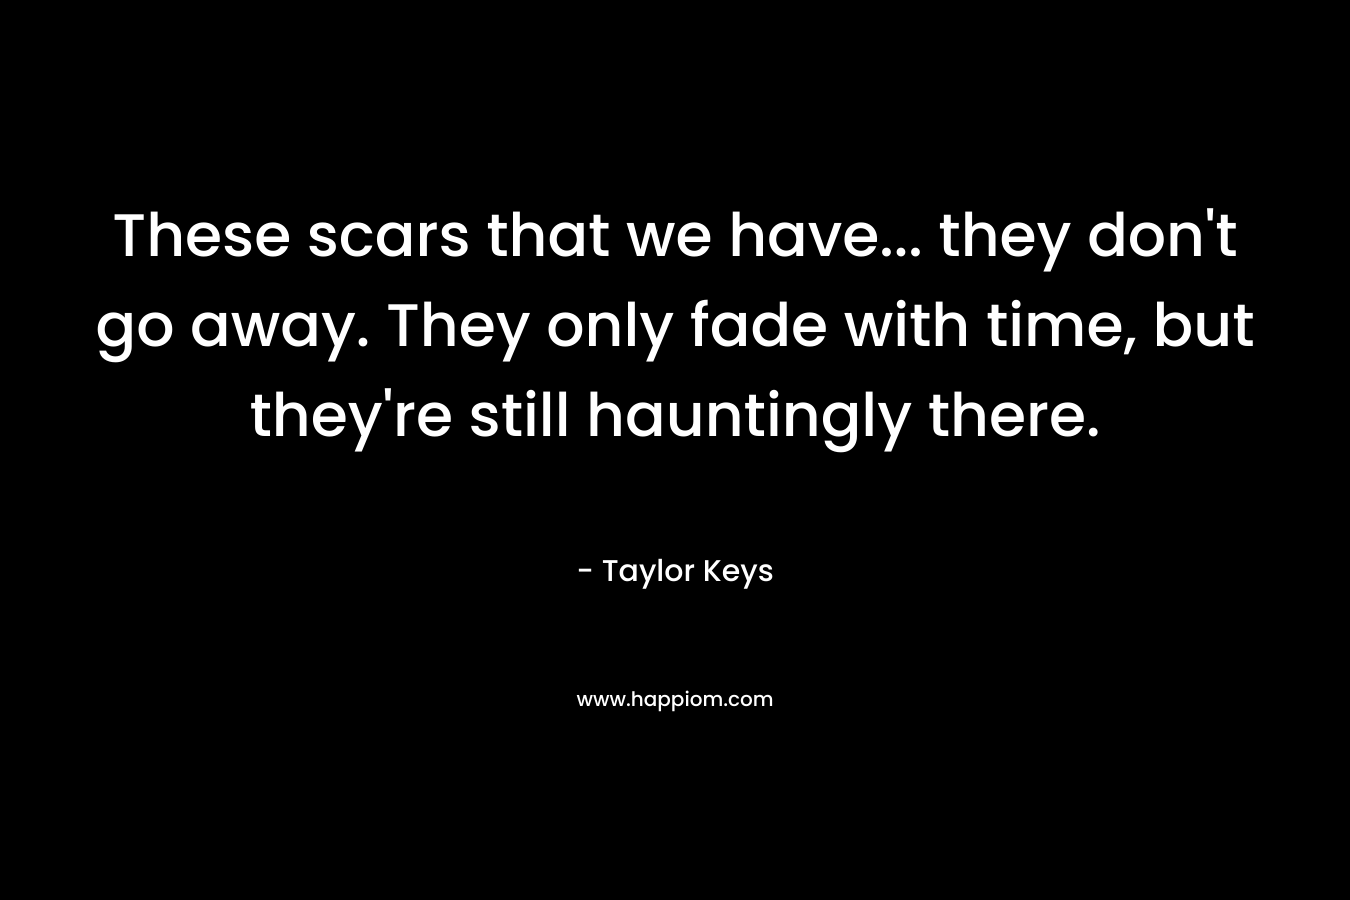 These scars that we have... they don't go away. They only fade with time, but they're still hauntingly there.